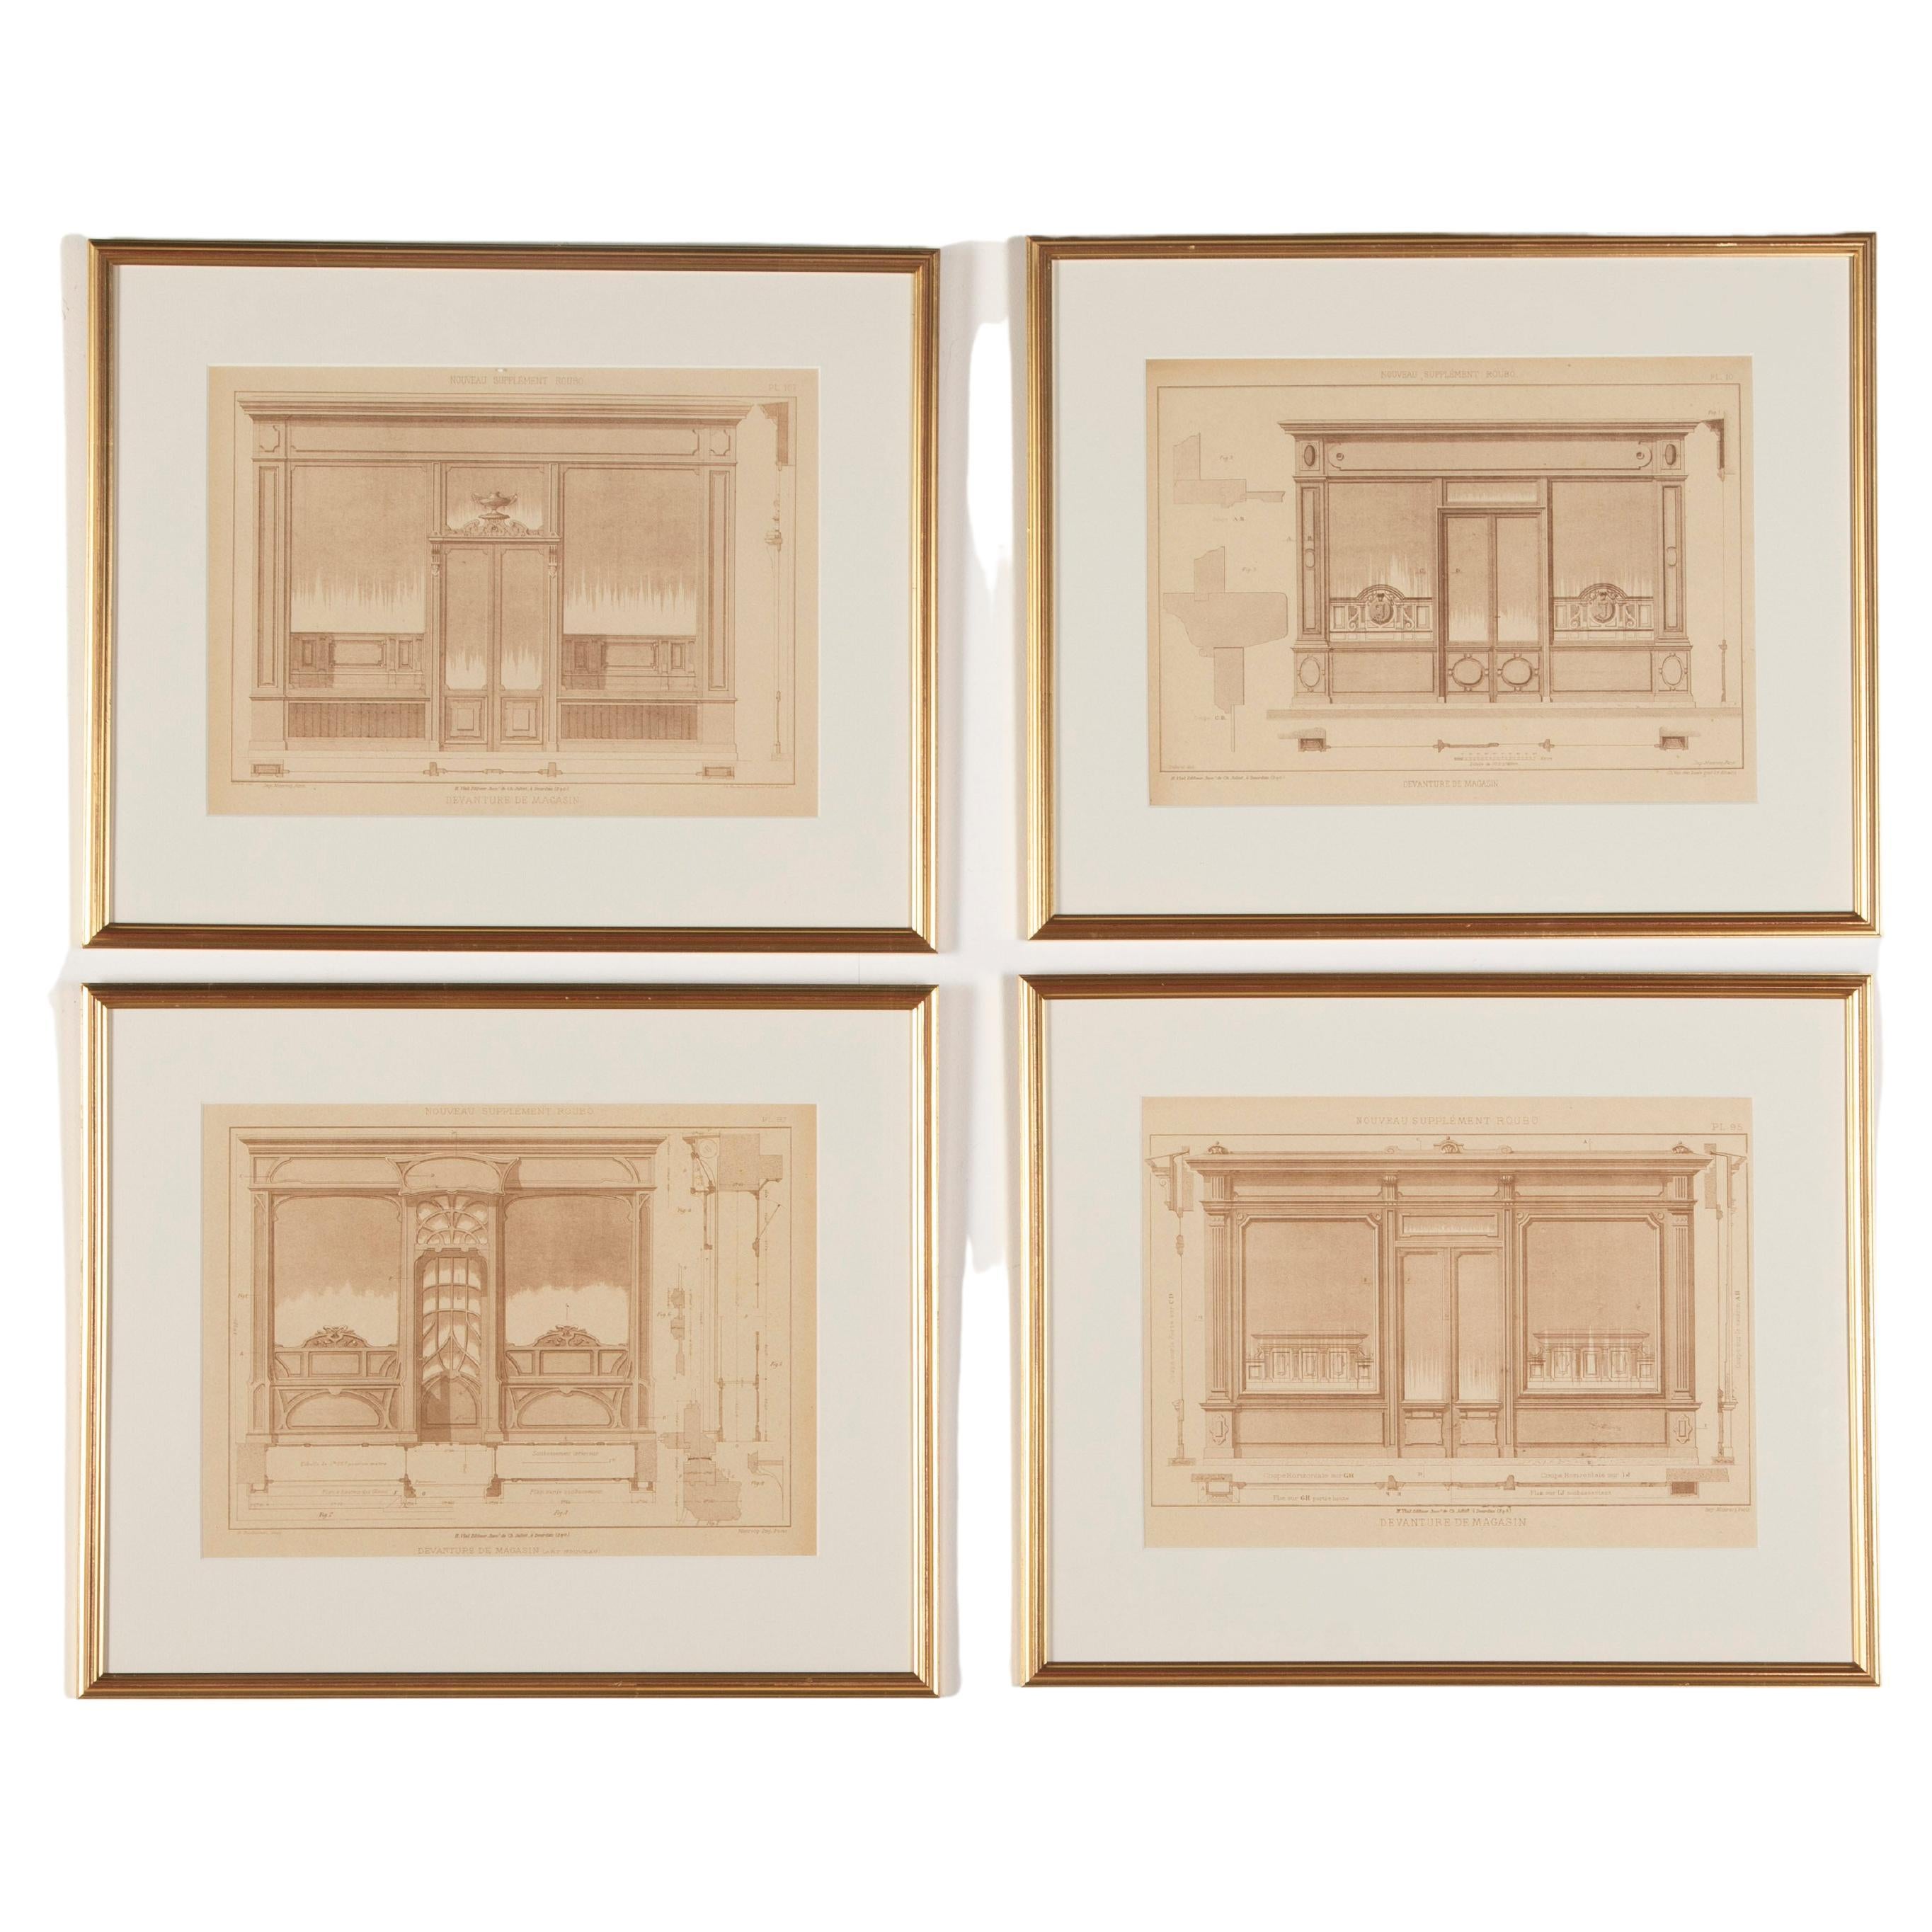 Set of Four French Architectural Engravings of Shopfronts